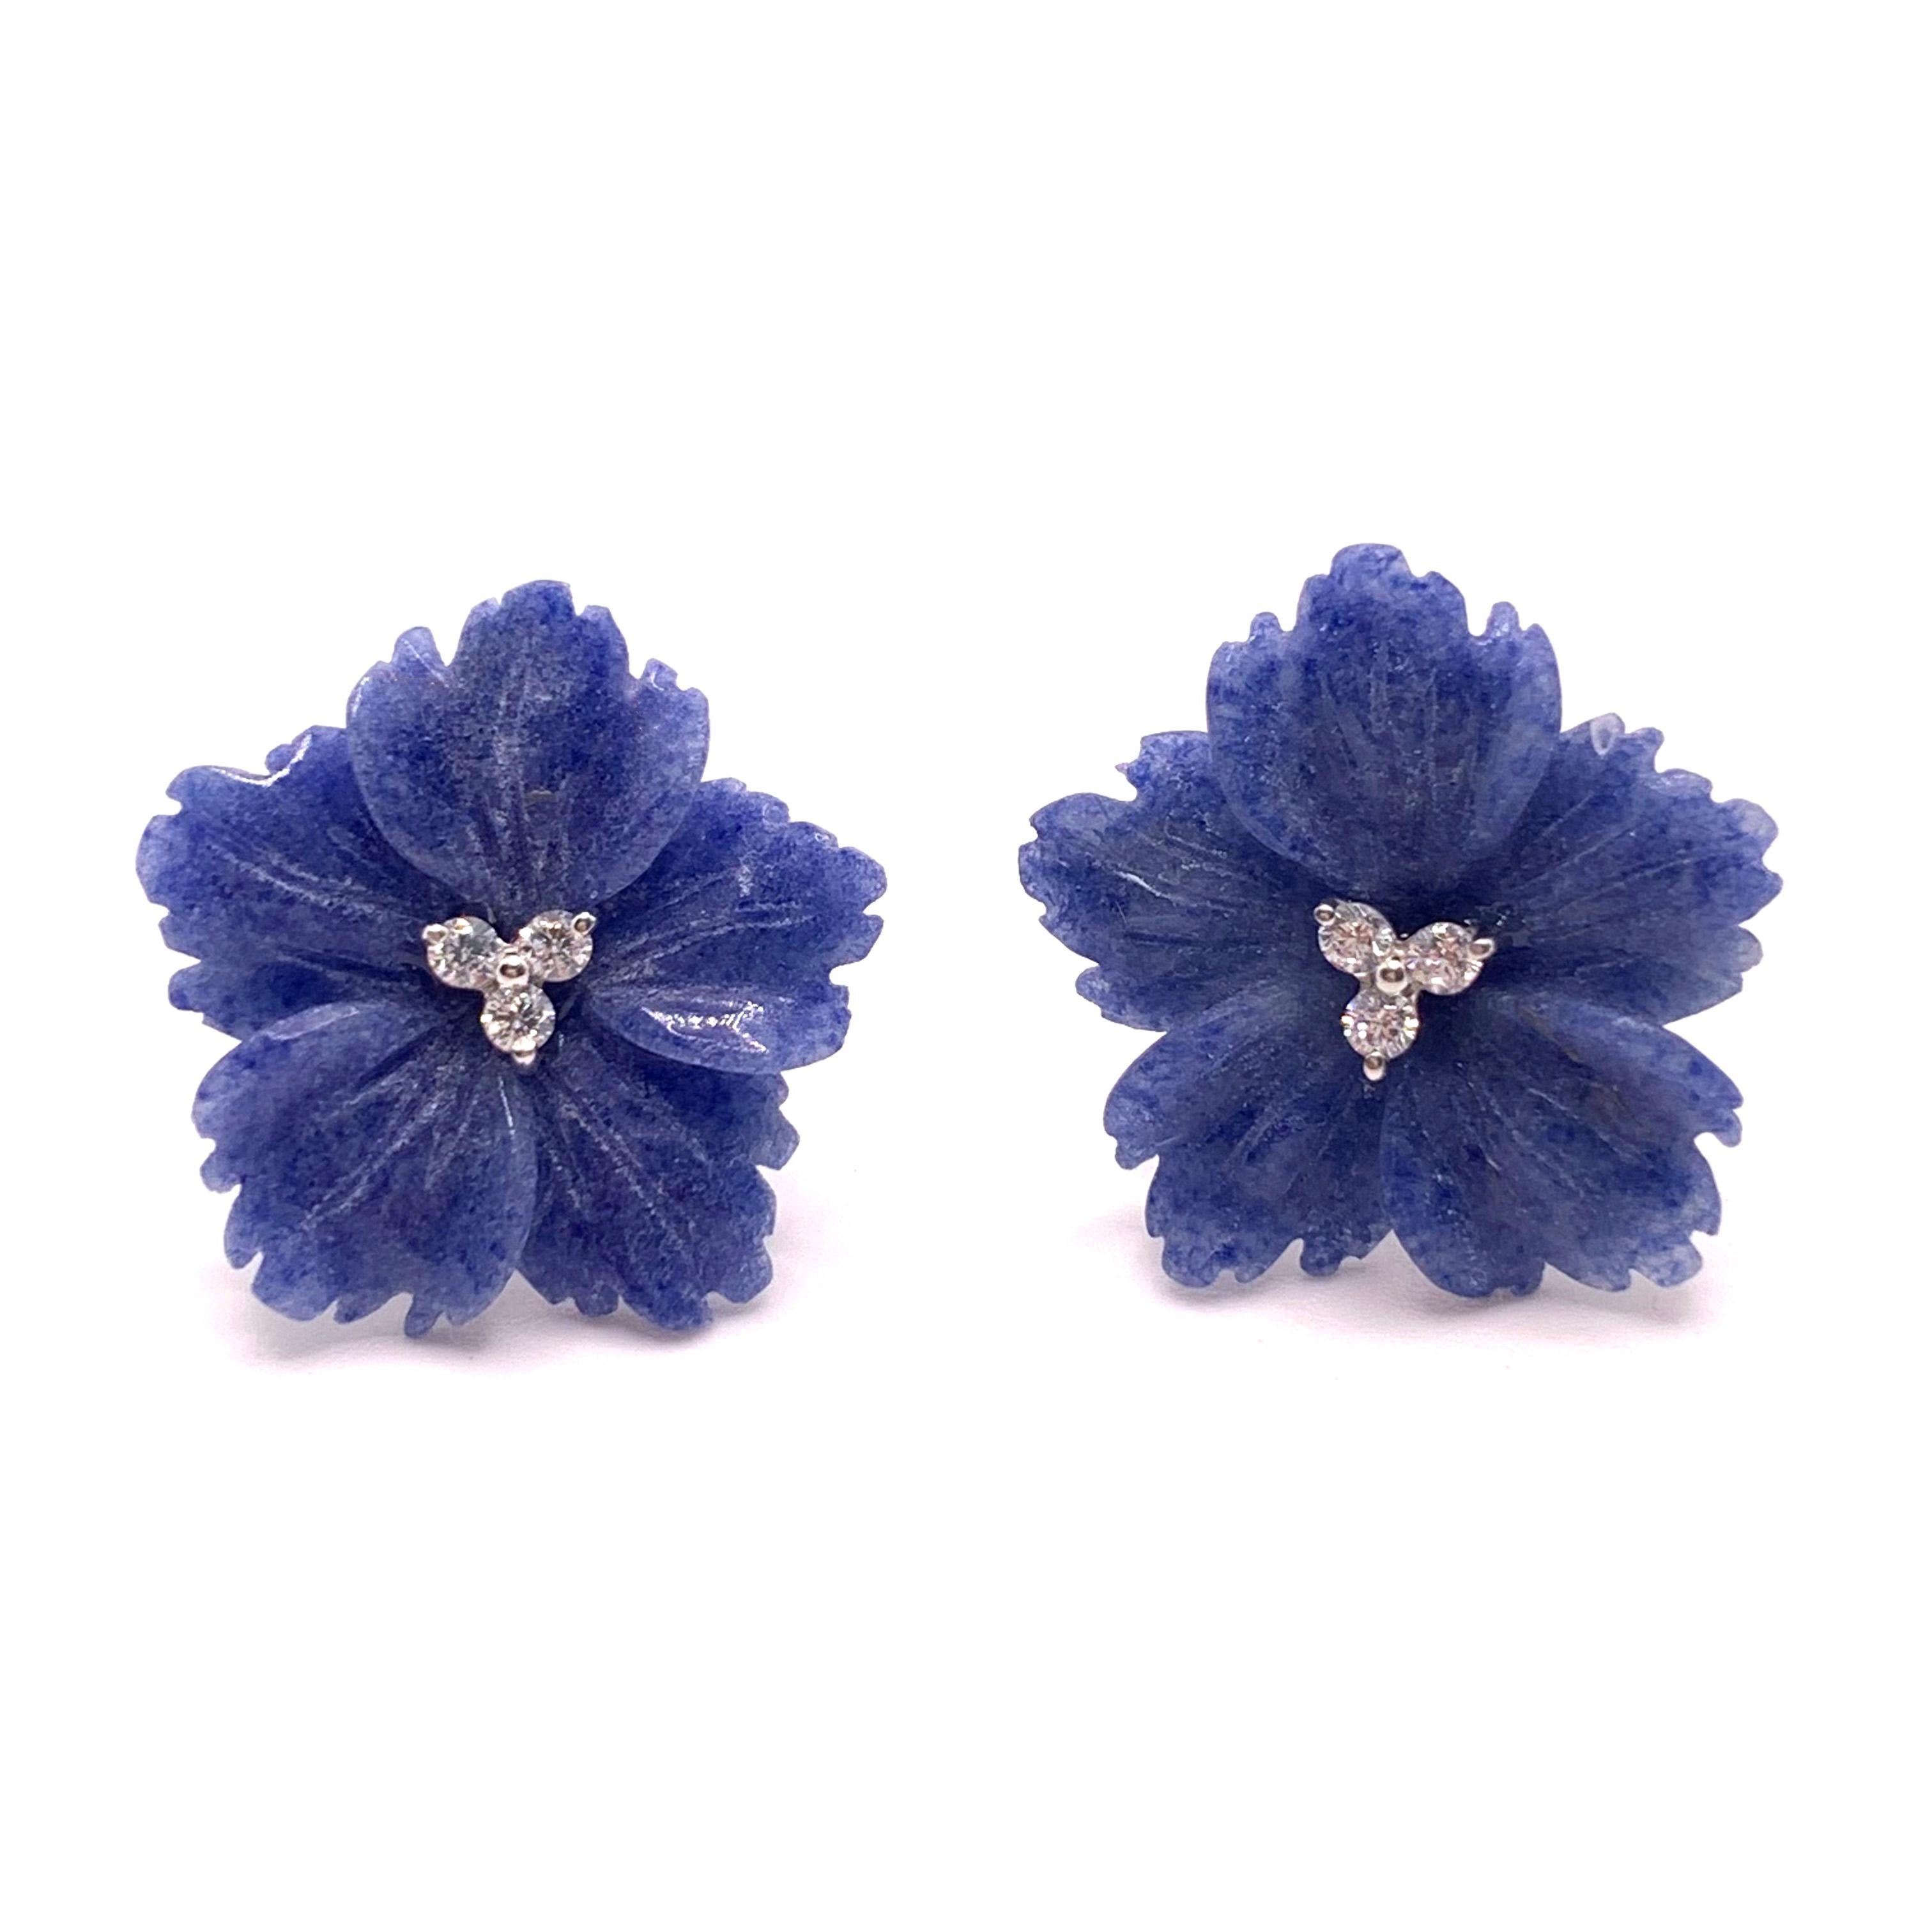 Elegant 19mm Carved Dumortierite FlowerEarrings

This gorgeous pair of earrings features 19mm dumortierite carved into beautiful three dimension flower, adorned with round simulated diamond in the center, handset in platinum rhodium plated sterling